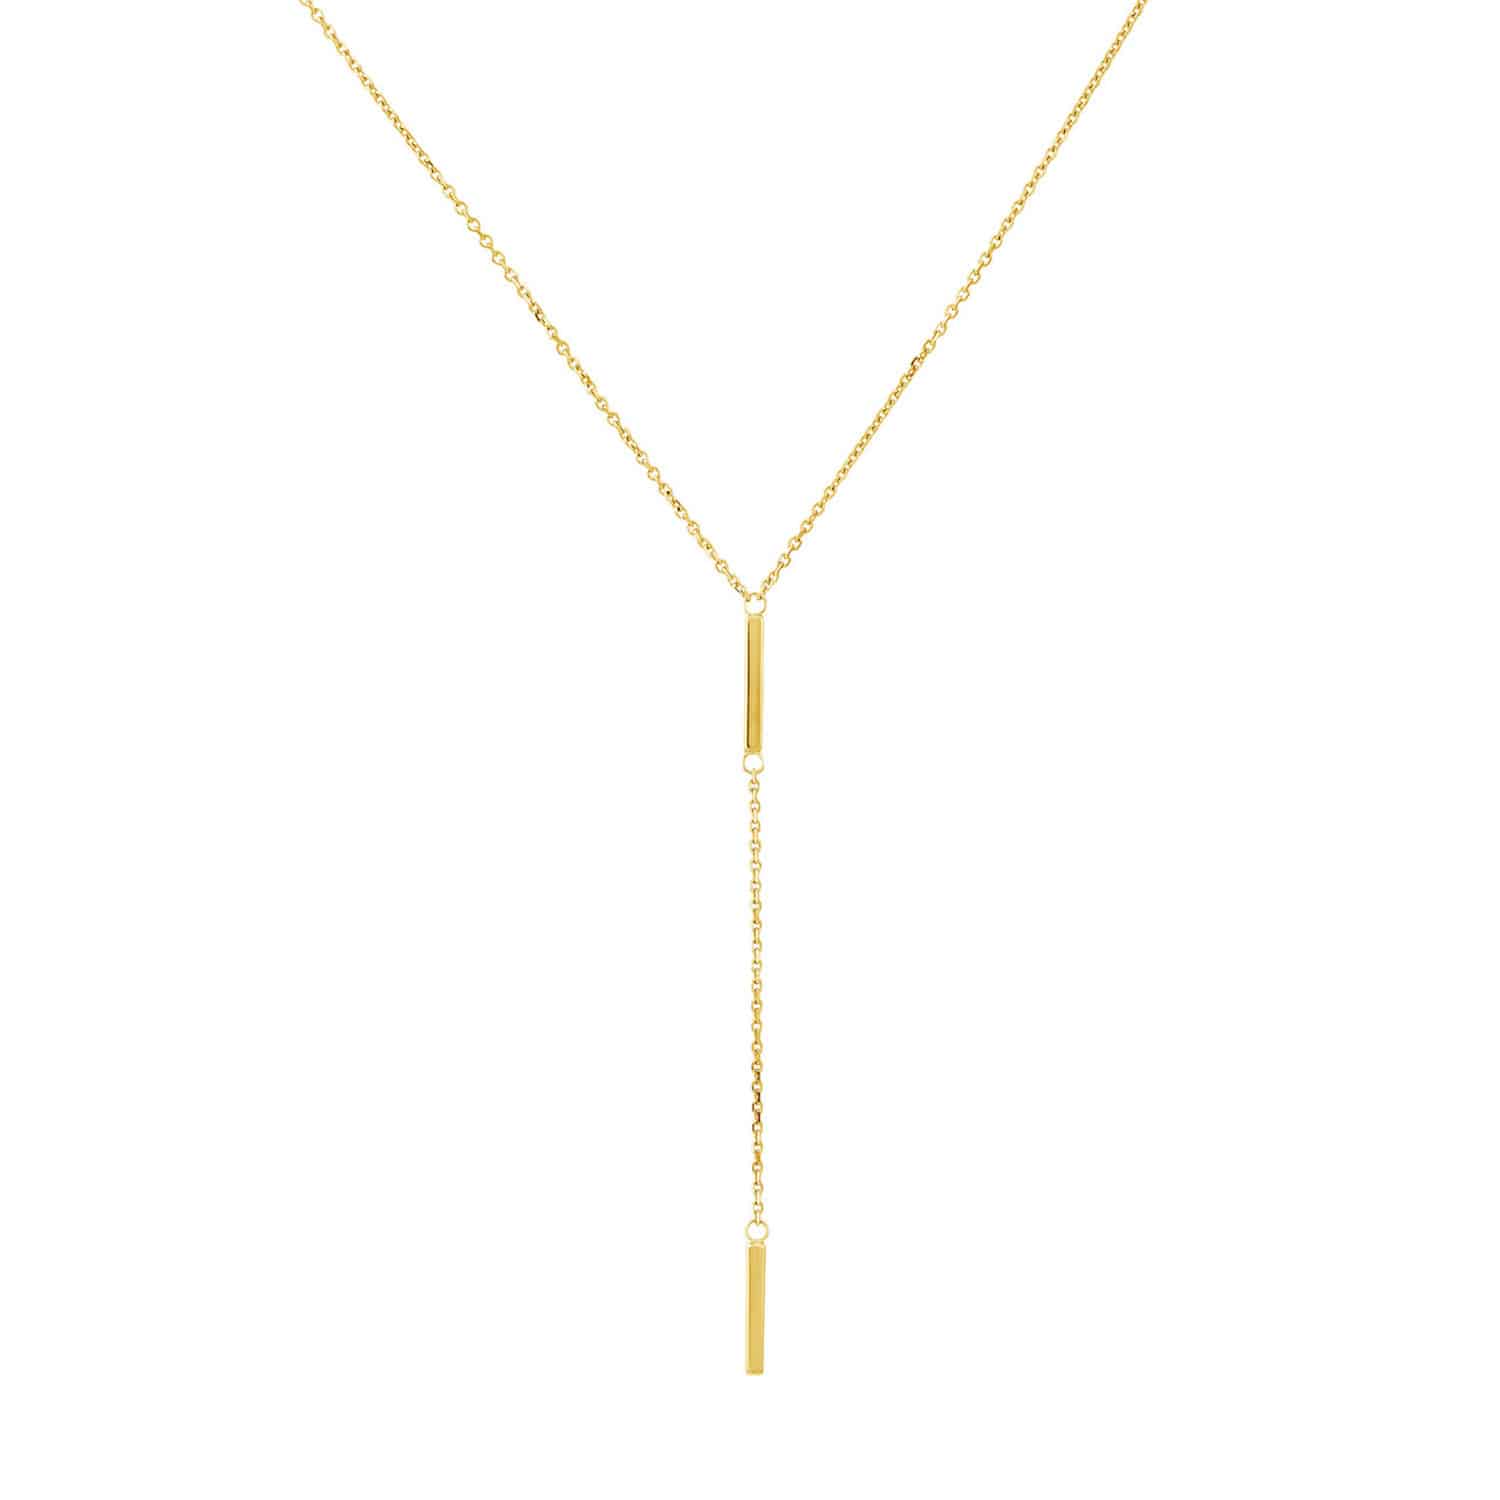 14K Yellow Gold Double 2-Bar Pendant Lariat Chain Necklace 16"- 18" Adjustable - Yellow Gold